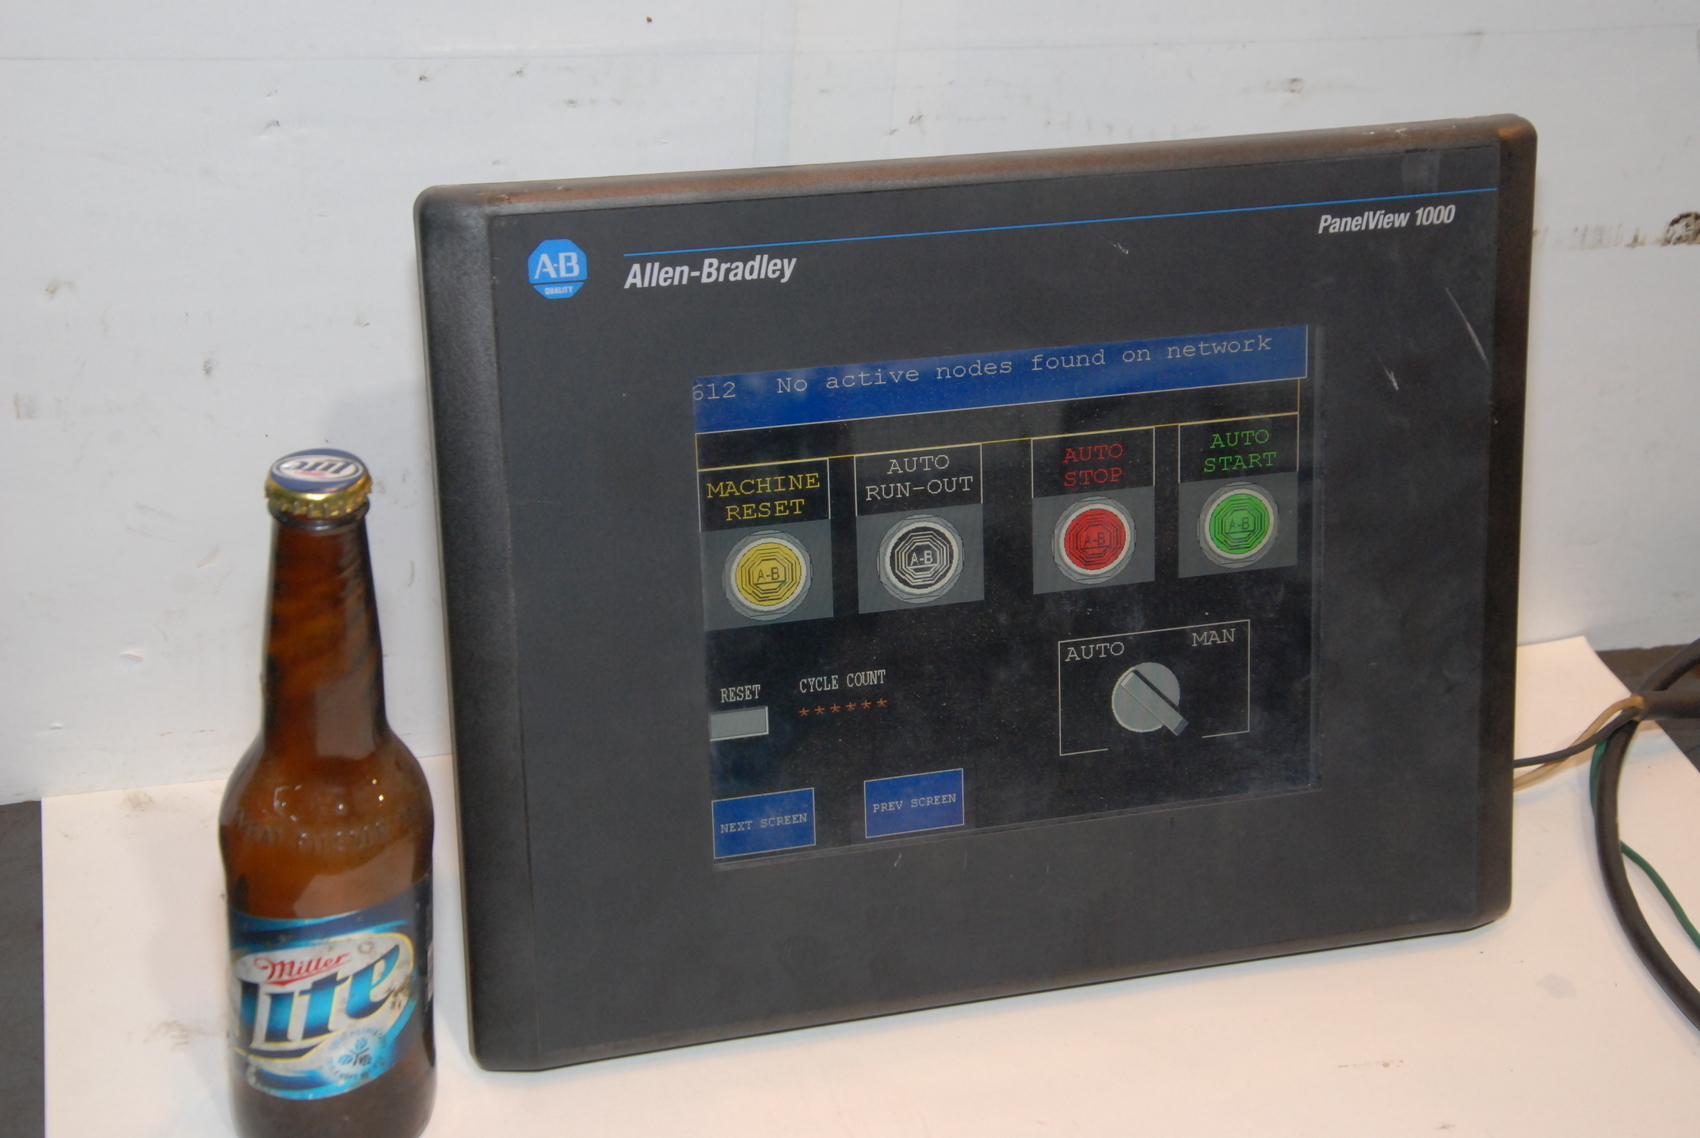 Allen-Bradley 2711-T10C9 PanelView 1000 Color Touch Screen monitor